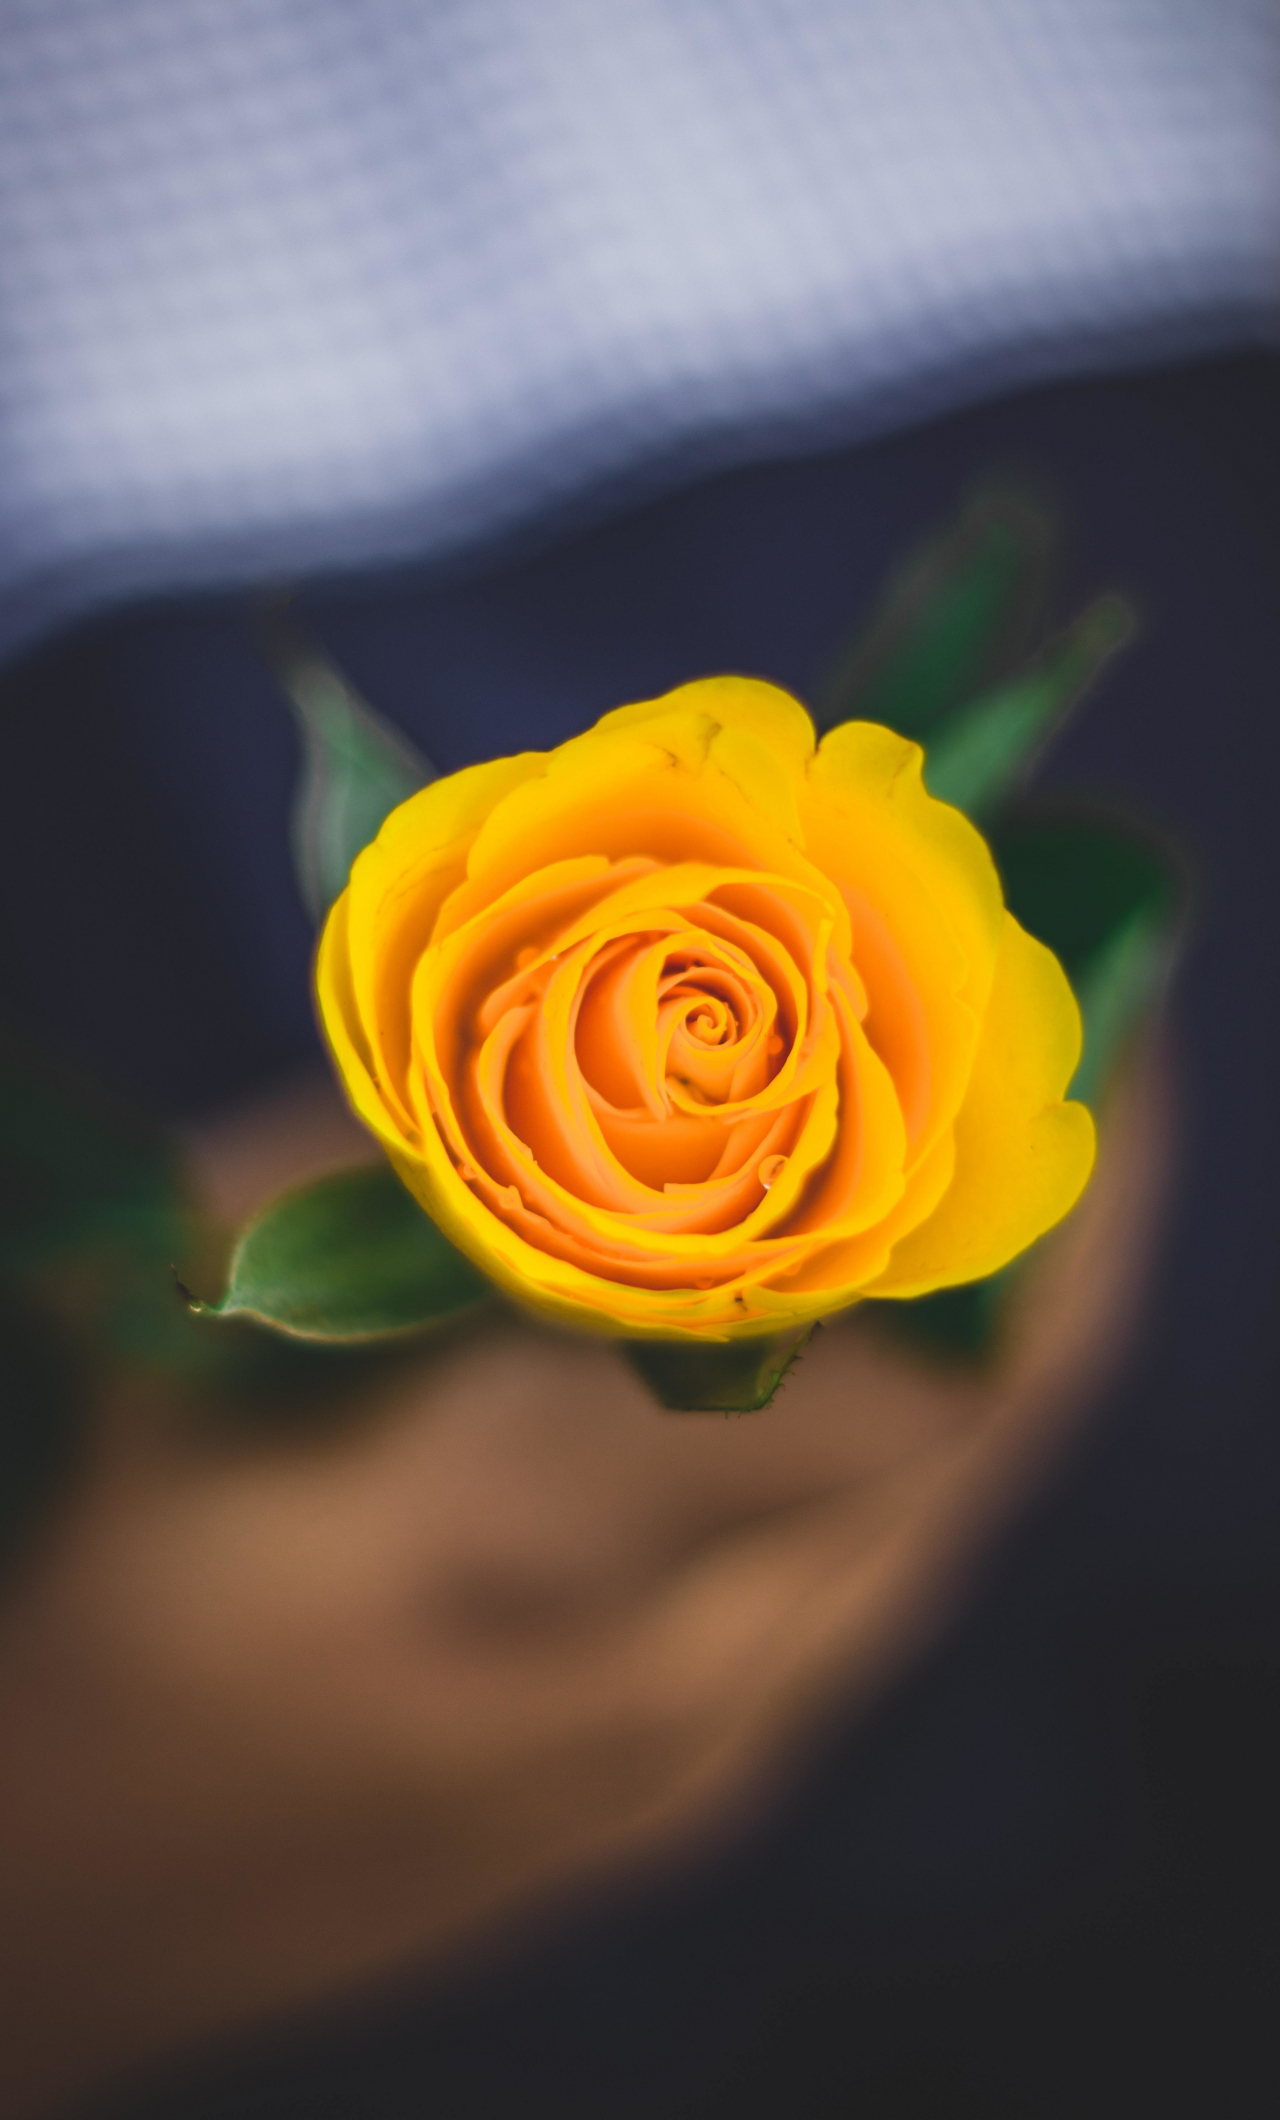 Download wallpaper 1280x2120 yellow rose, portrait, iphone 6 plus,  1280x2120 hd background, 23643